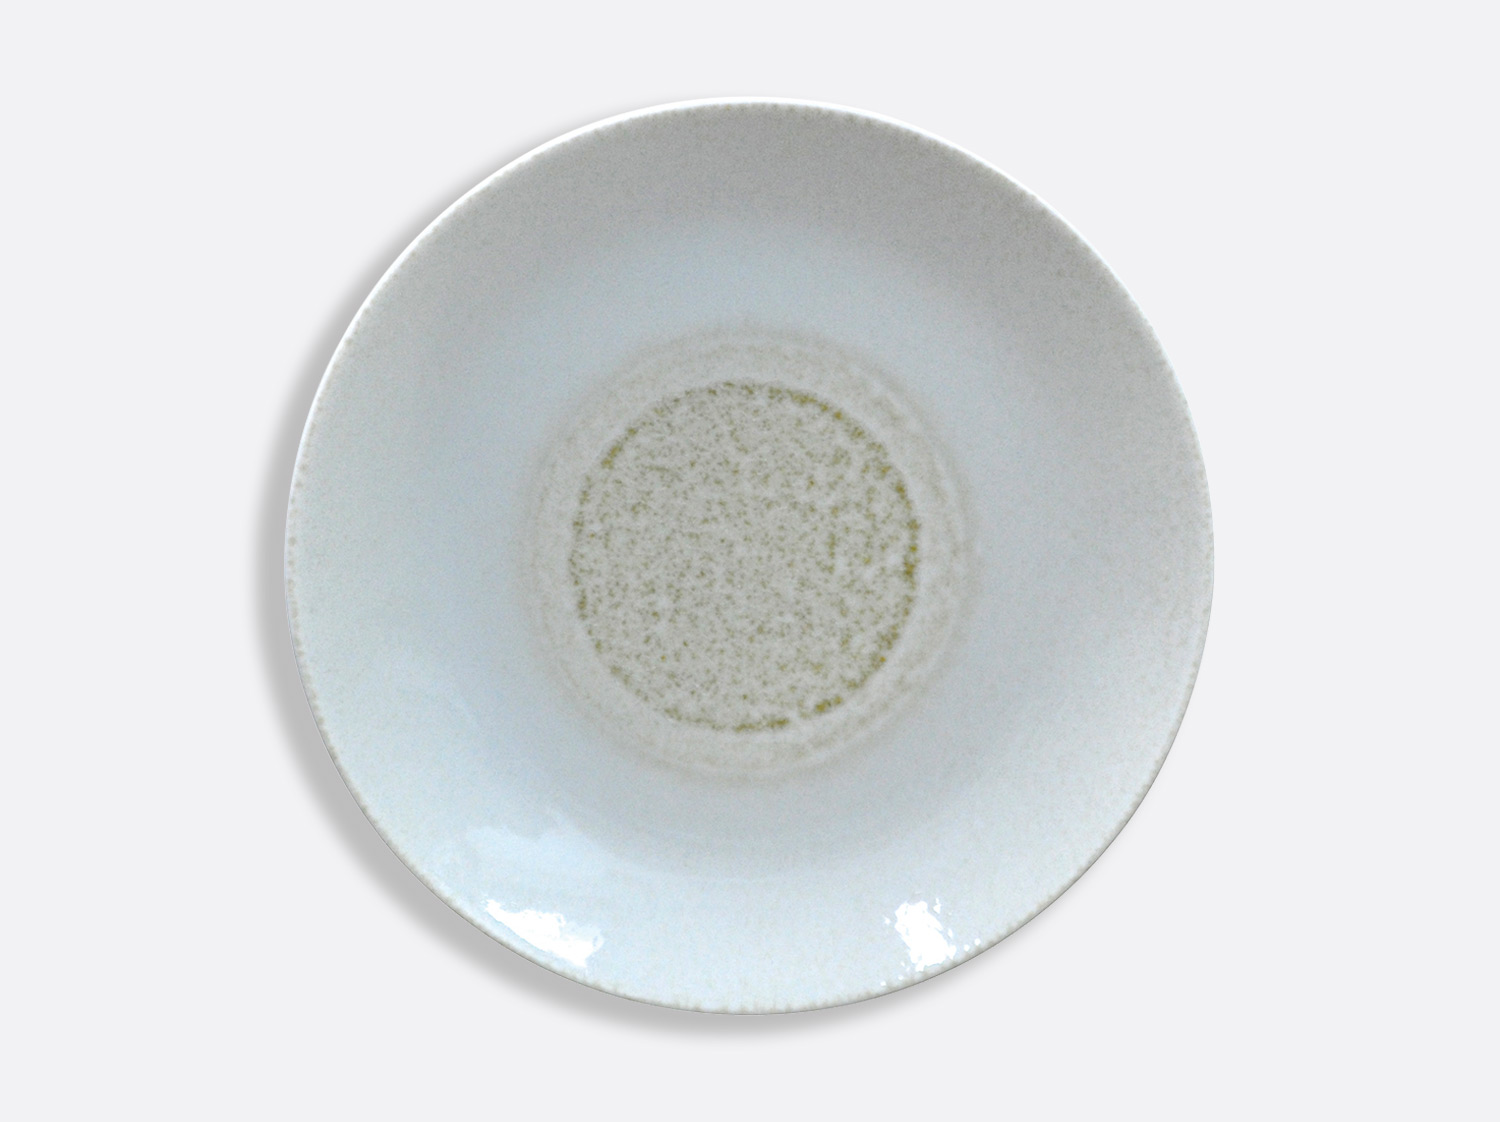 China Ivoire coupe plate 29.5 cm of the collection Iris Ivoire | Bernardaud